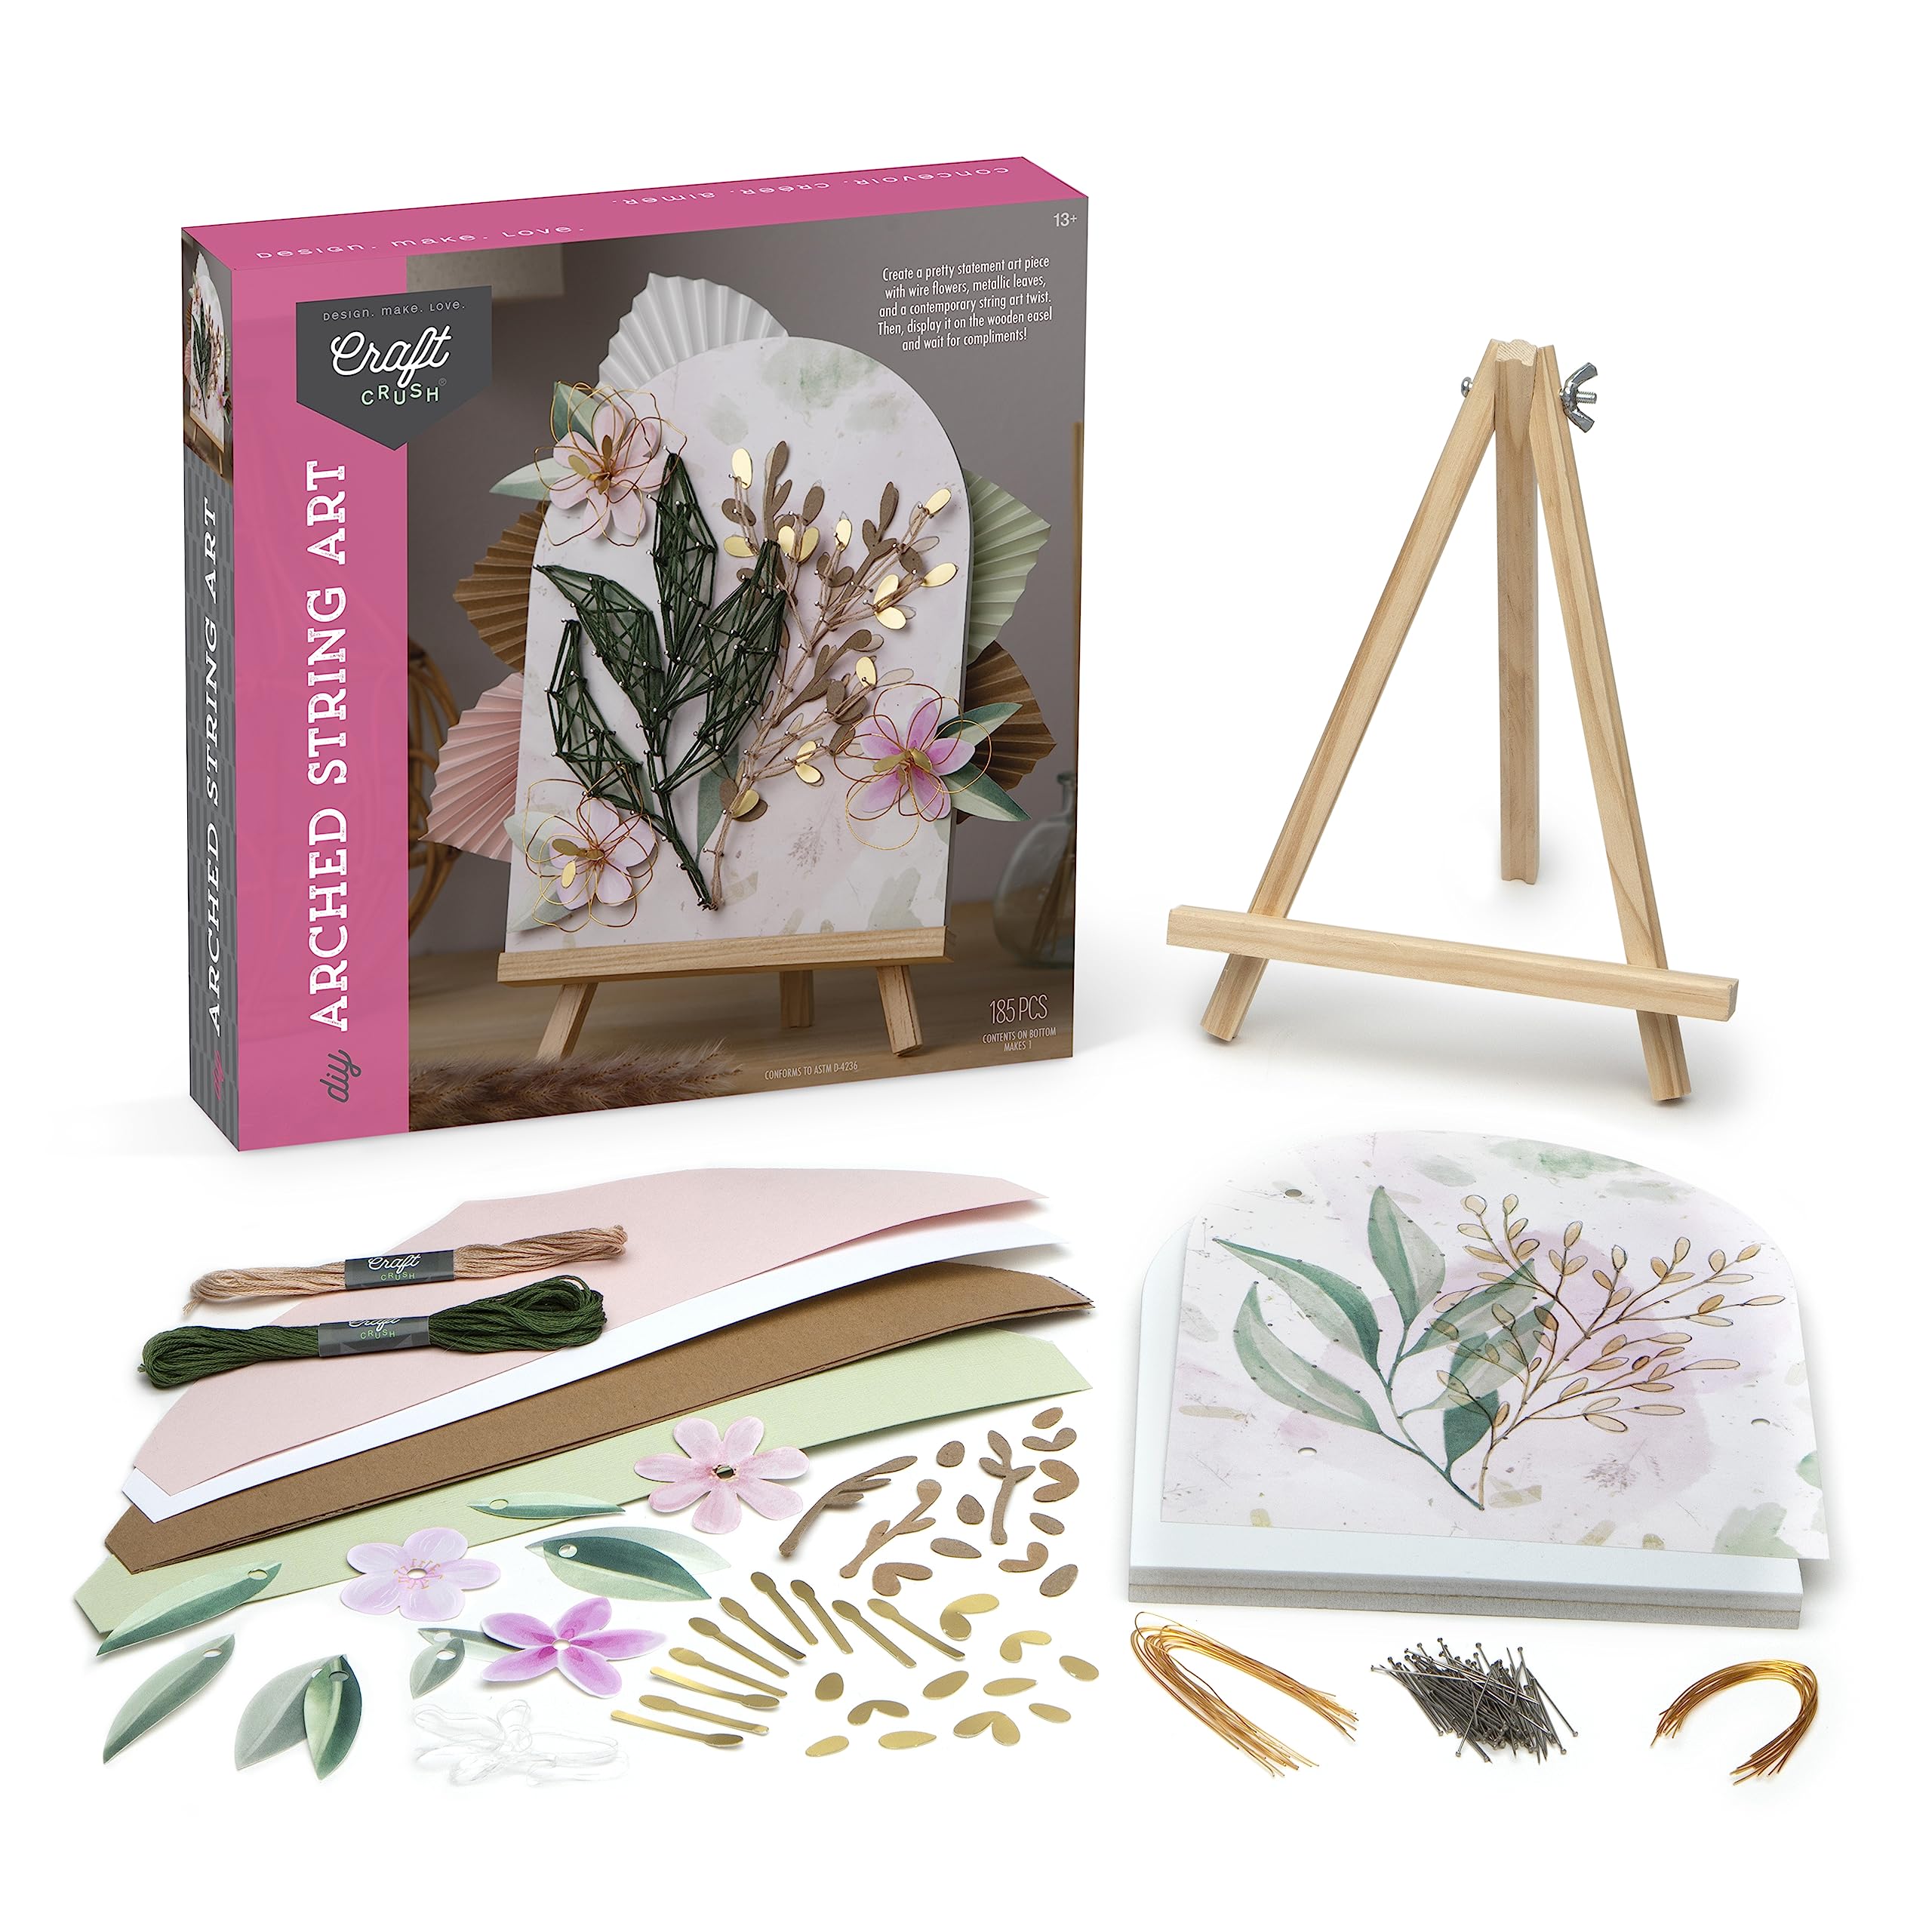 Craft Crush DIY String Art Craft Kit - Floral Interior Design DIY Activity for Teens & Adults - Complete String Art Kit with Embroidery Thread, Foam Canvas, Metal Pins, Wooden Easel - Ages 13+